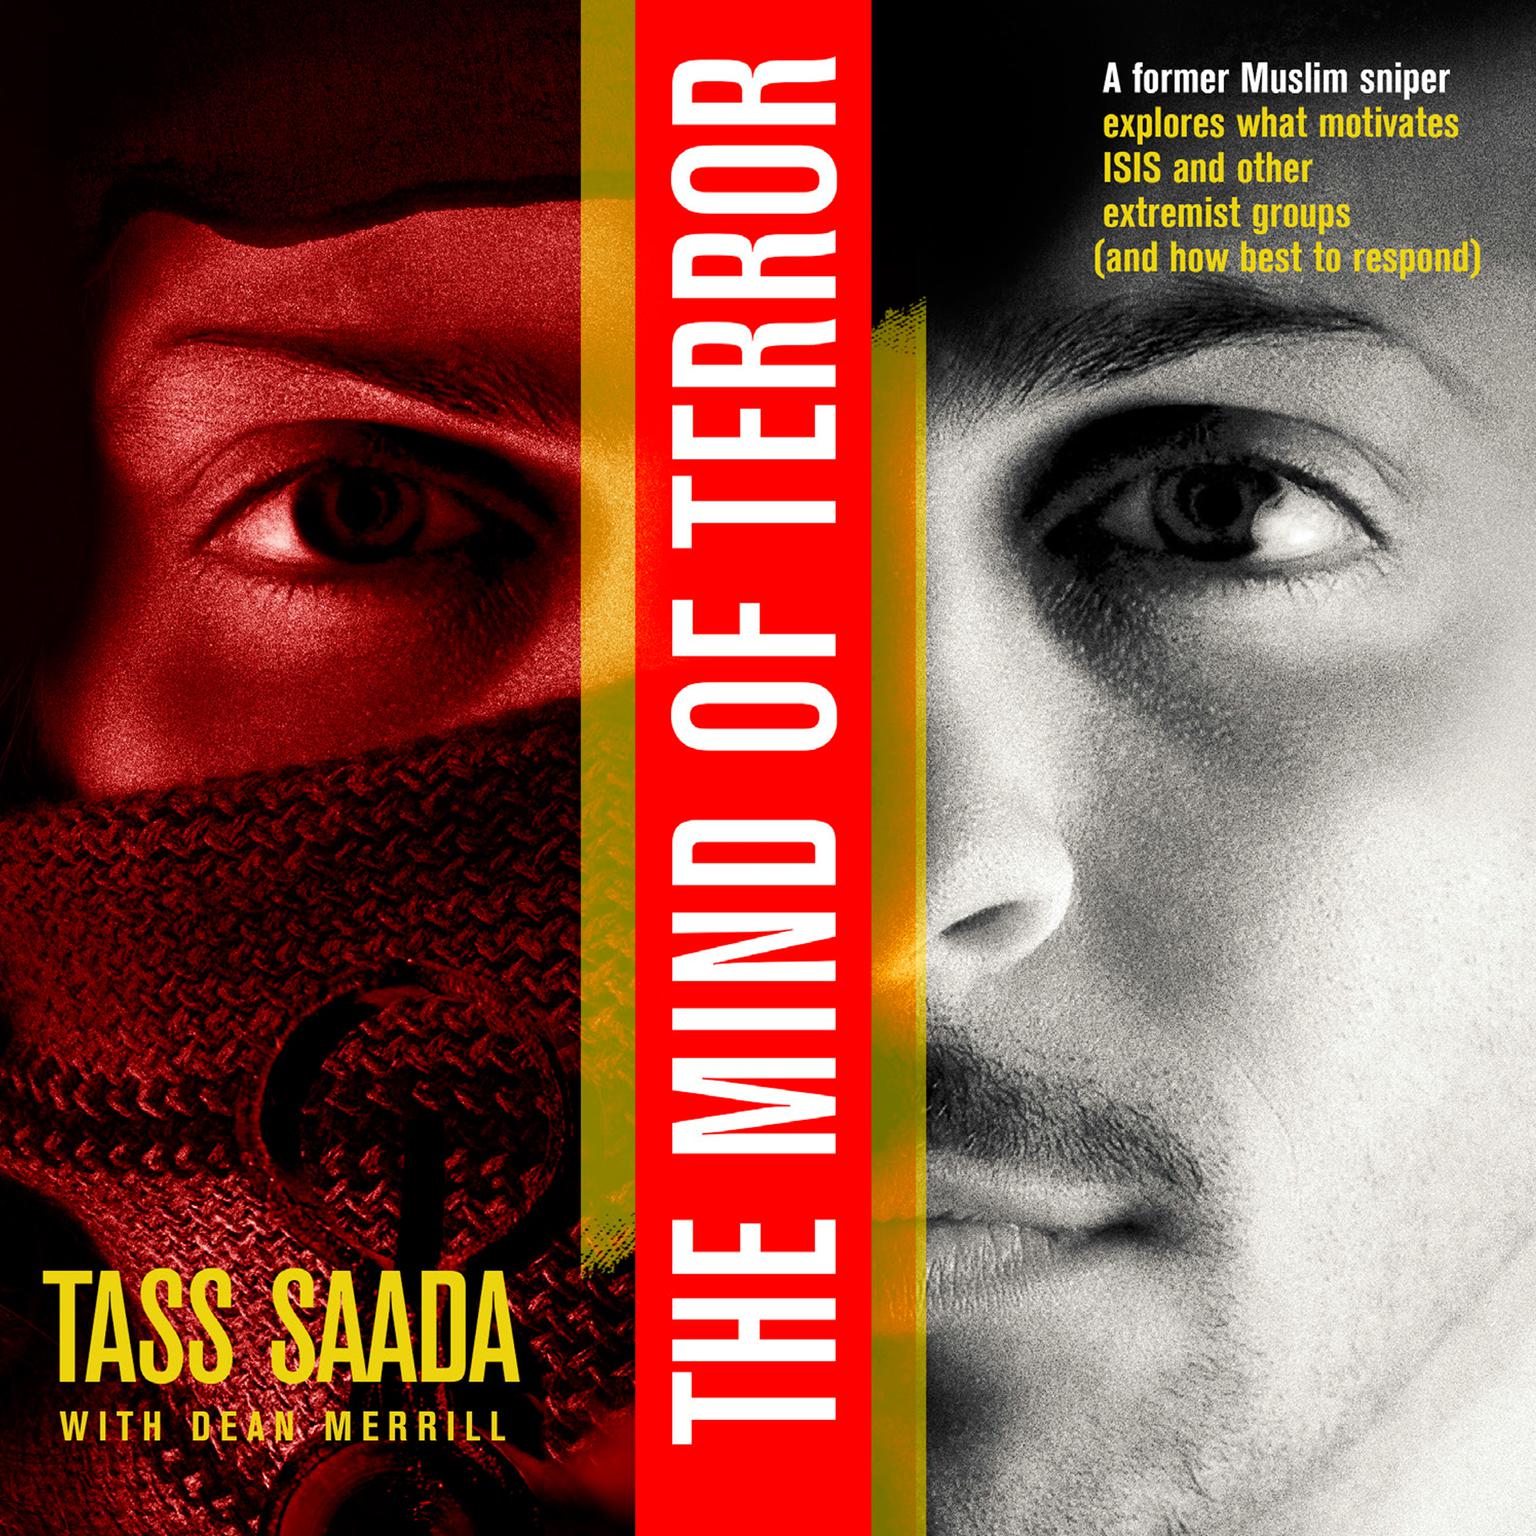 The Mind of Terror: A Former Muslim Sniper Explores What Motiviates ISIS and other Extremist Groups (and how best to respond) Audiobook, by Tass Saada